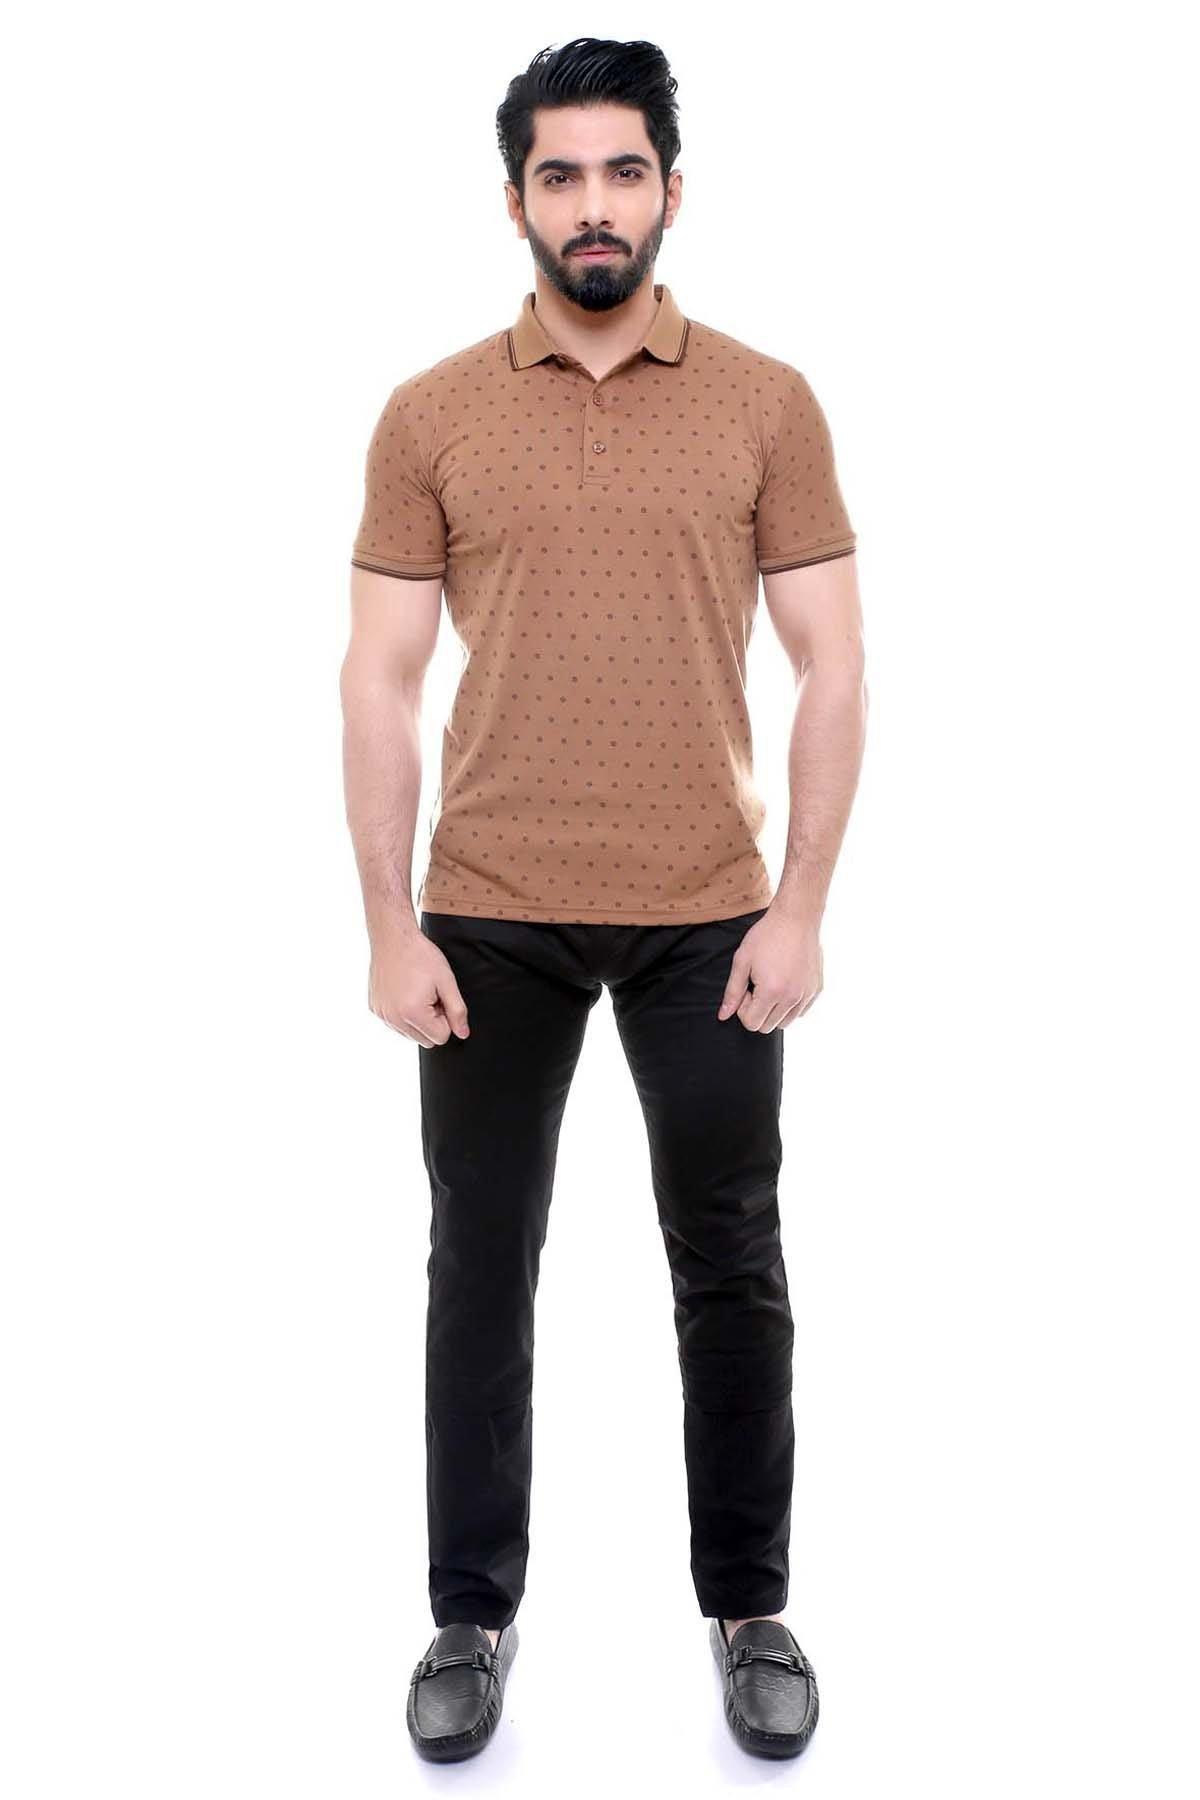 T SHIRT POLO LIGHT BROWN at Charcoal Clothing